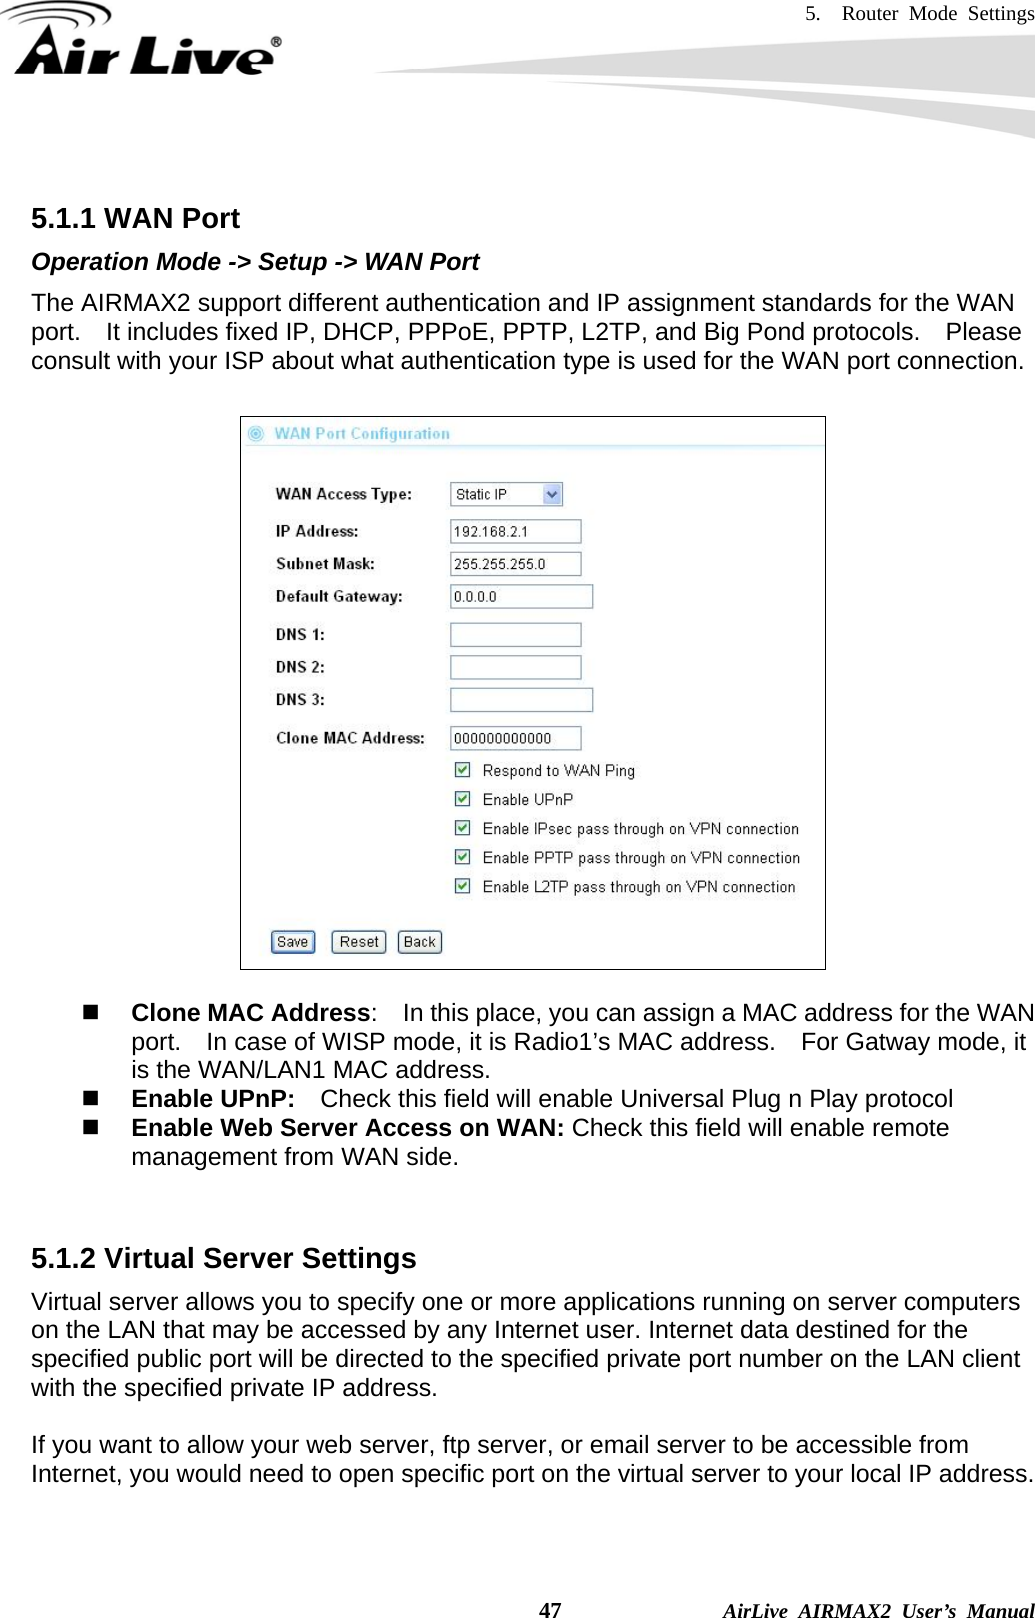 5.  Router Mode Settings    47              AirLive AIRMAX2 User’s Manual  5.1.1 WAN Port Operation Mode -&gt; Setup -&gt; WAN Port The AIRMAX2 support different authentication and IP assignment standards for the WAN port.    It includes fixed IP, DHCP, PPPoE, PPTP, L2TP, and Big Pond protocols.    Please consult with your ISP about what authentication type is used for the WAN port connection.     Clone MAC Address:    In this place, you can assign a MAC address for the WAN port.    In case of WISP mode, it is Radio1’s MAC address.    For Gatway mode, it is the WAN/LAN1 MAC address.  Enable UPnP:    Check this field will enable Universal Plug n Play protocol  Enable Web Server Access on WAN: Check this field will enable remote management from WAN side.       5.1.2 Virtual Server Settings Virtual server allows you to specify one or more applications running on server computers on the LAN that may be accessed by any Internet user. Internet data destined for the specified public port will be directed to the specified private port number on the LAN client with the specified private IP address.    If you want to allow your web server, ftp server, or email server to be accessible from Internet, you would need to open specific port on the virtual server to your local IP address.  